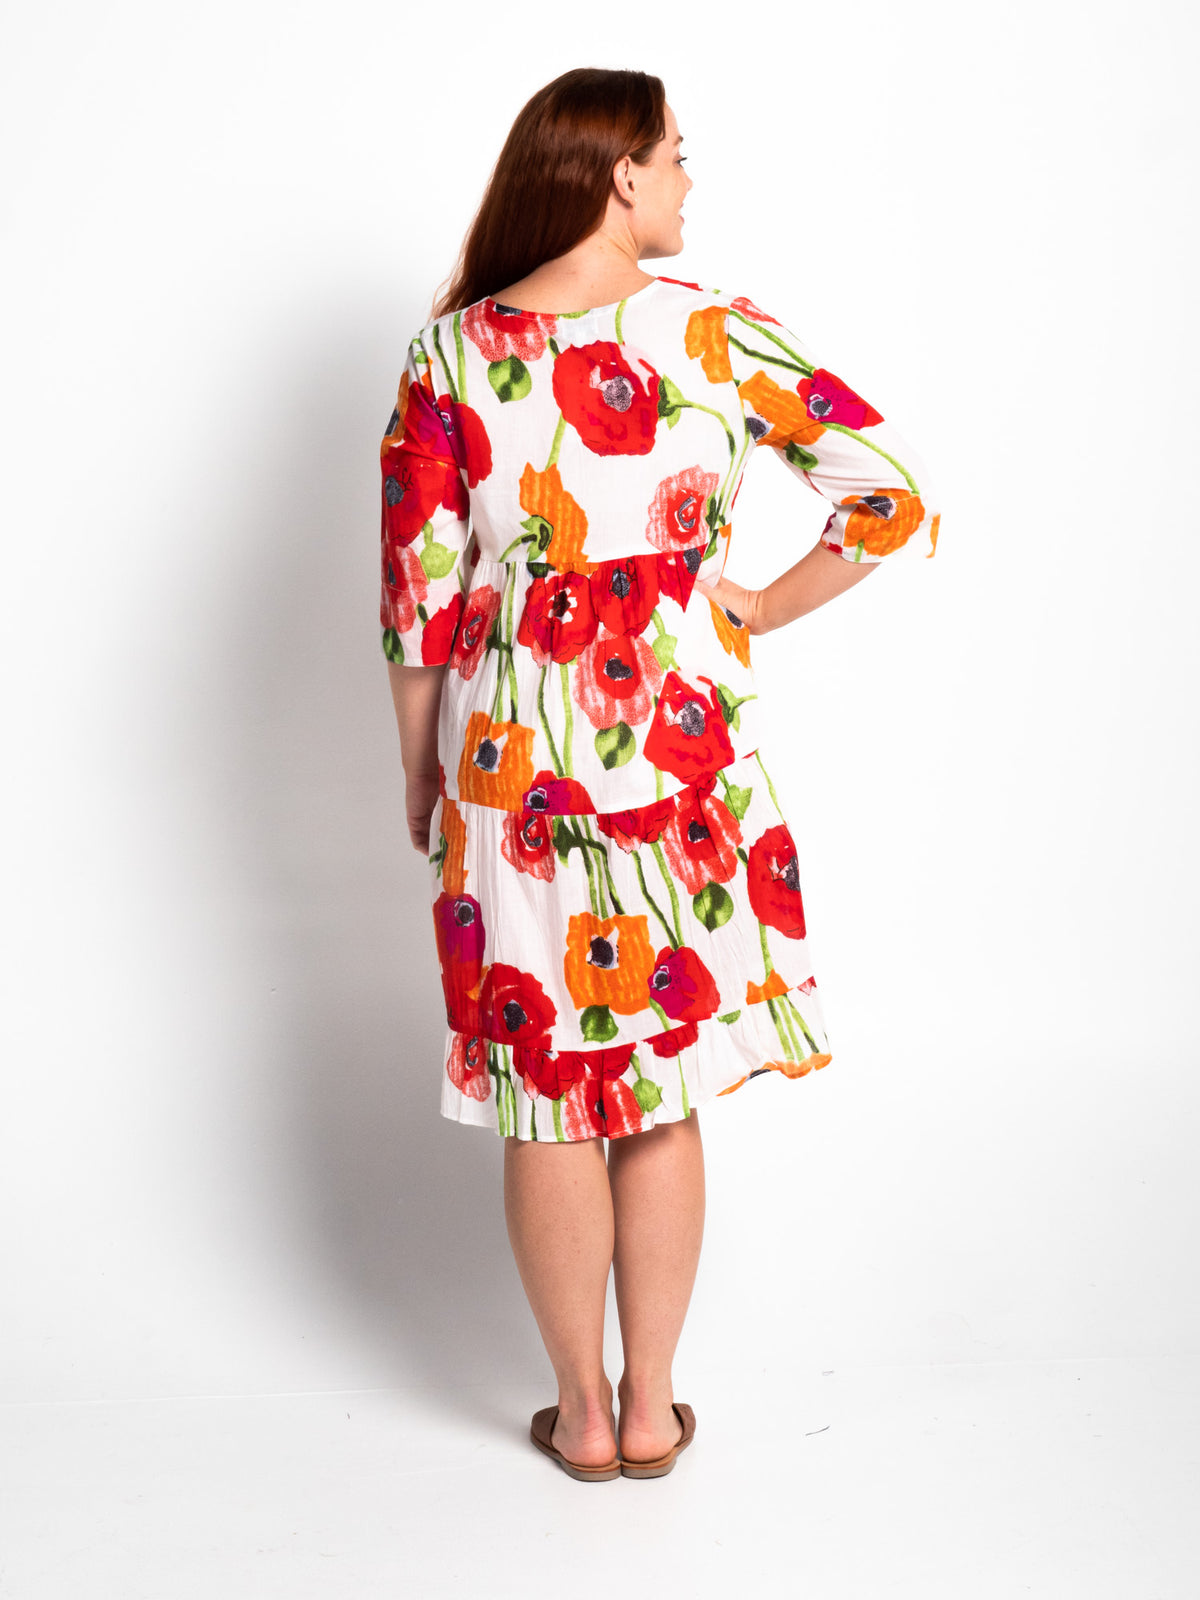 Keppel V-neck Gypsy Dress in Orange and Red Poppies